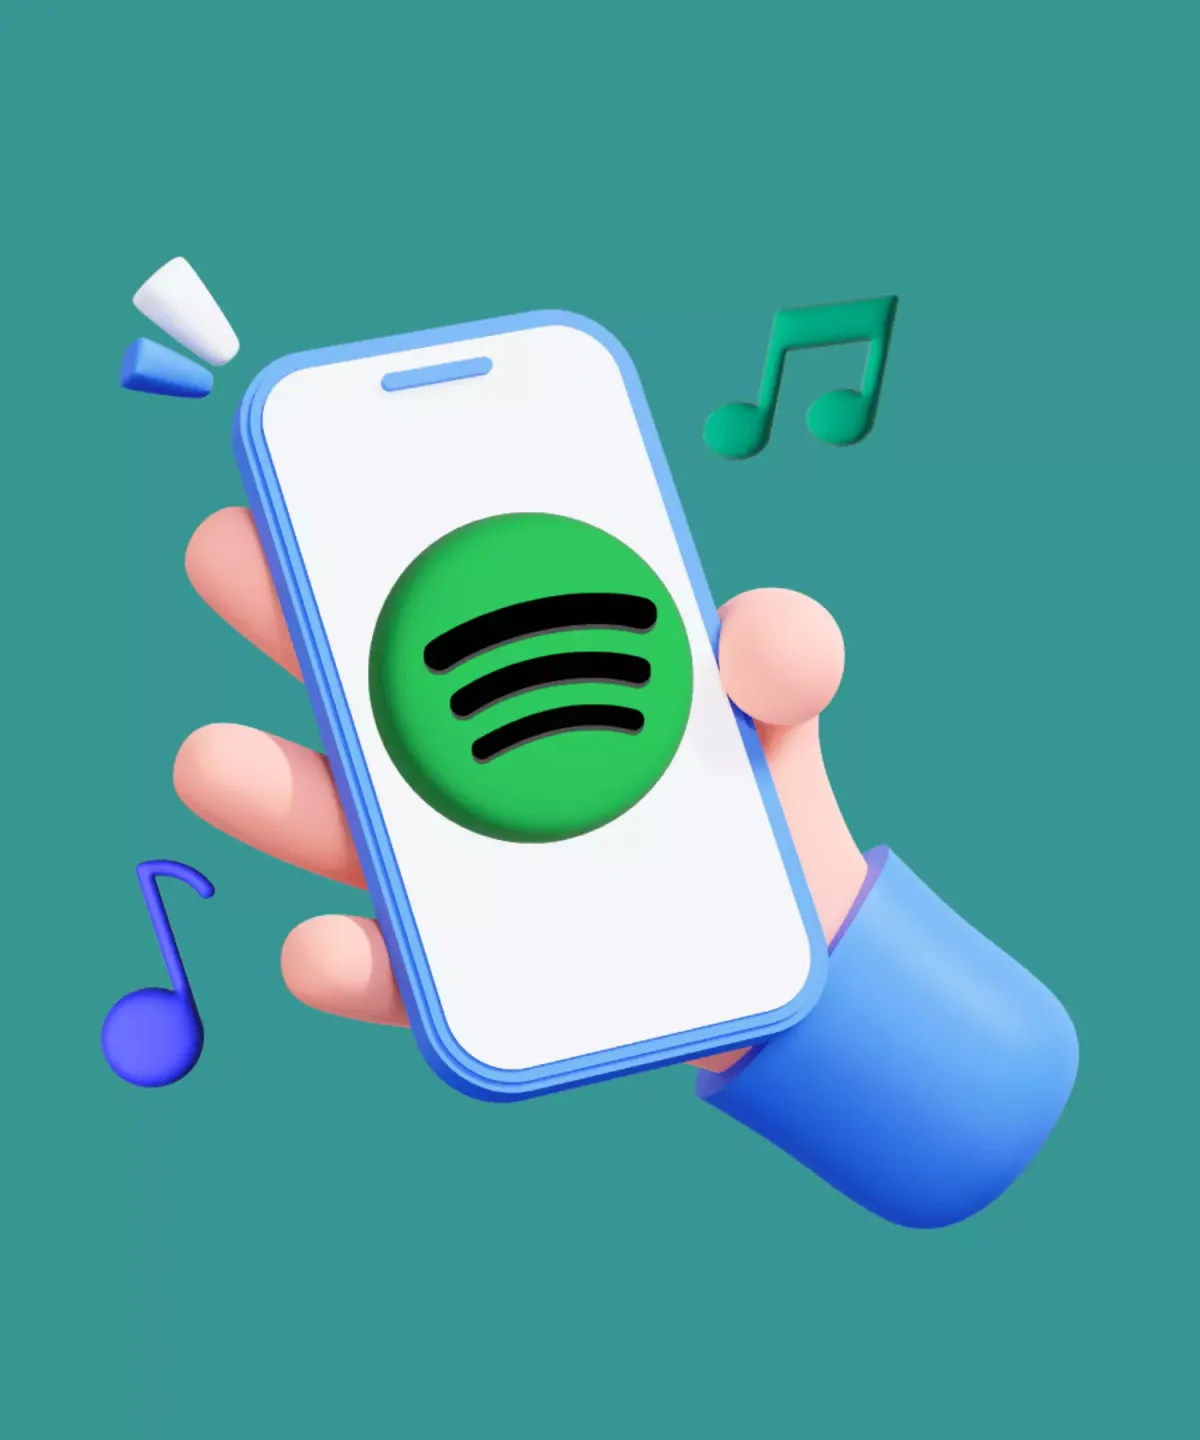 How to Make a Music App Like Spotify: Features, Cost and More